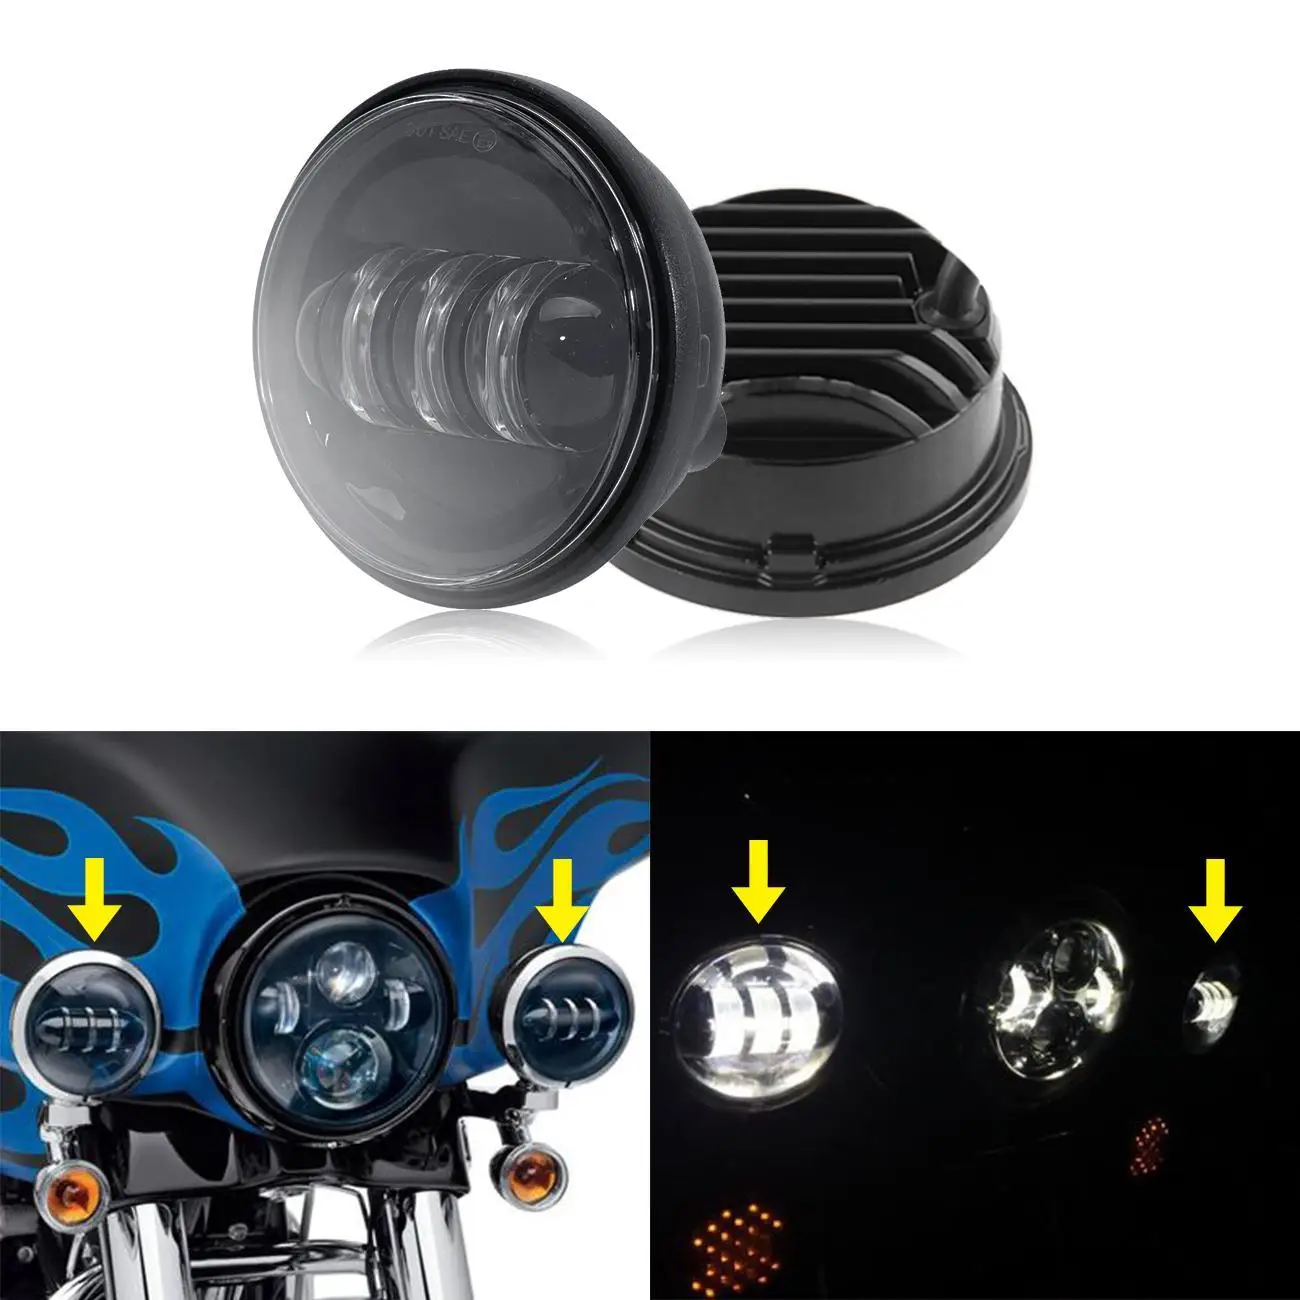 

1 Pair 4.5 inch LED Auxiliary Spot Fog Passing Light Lamp Headlights without Halo Ring For Harley/Davison/Electra/Glide/Touring